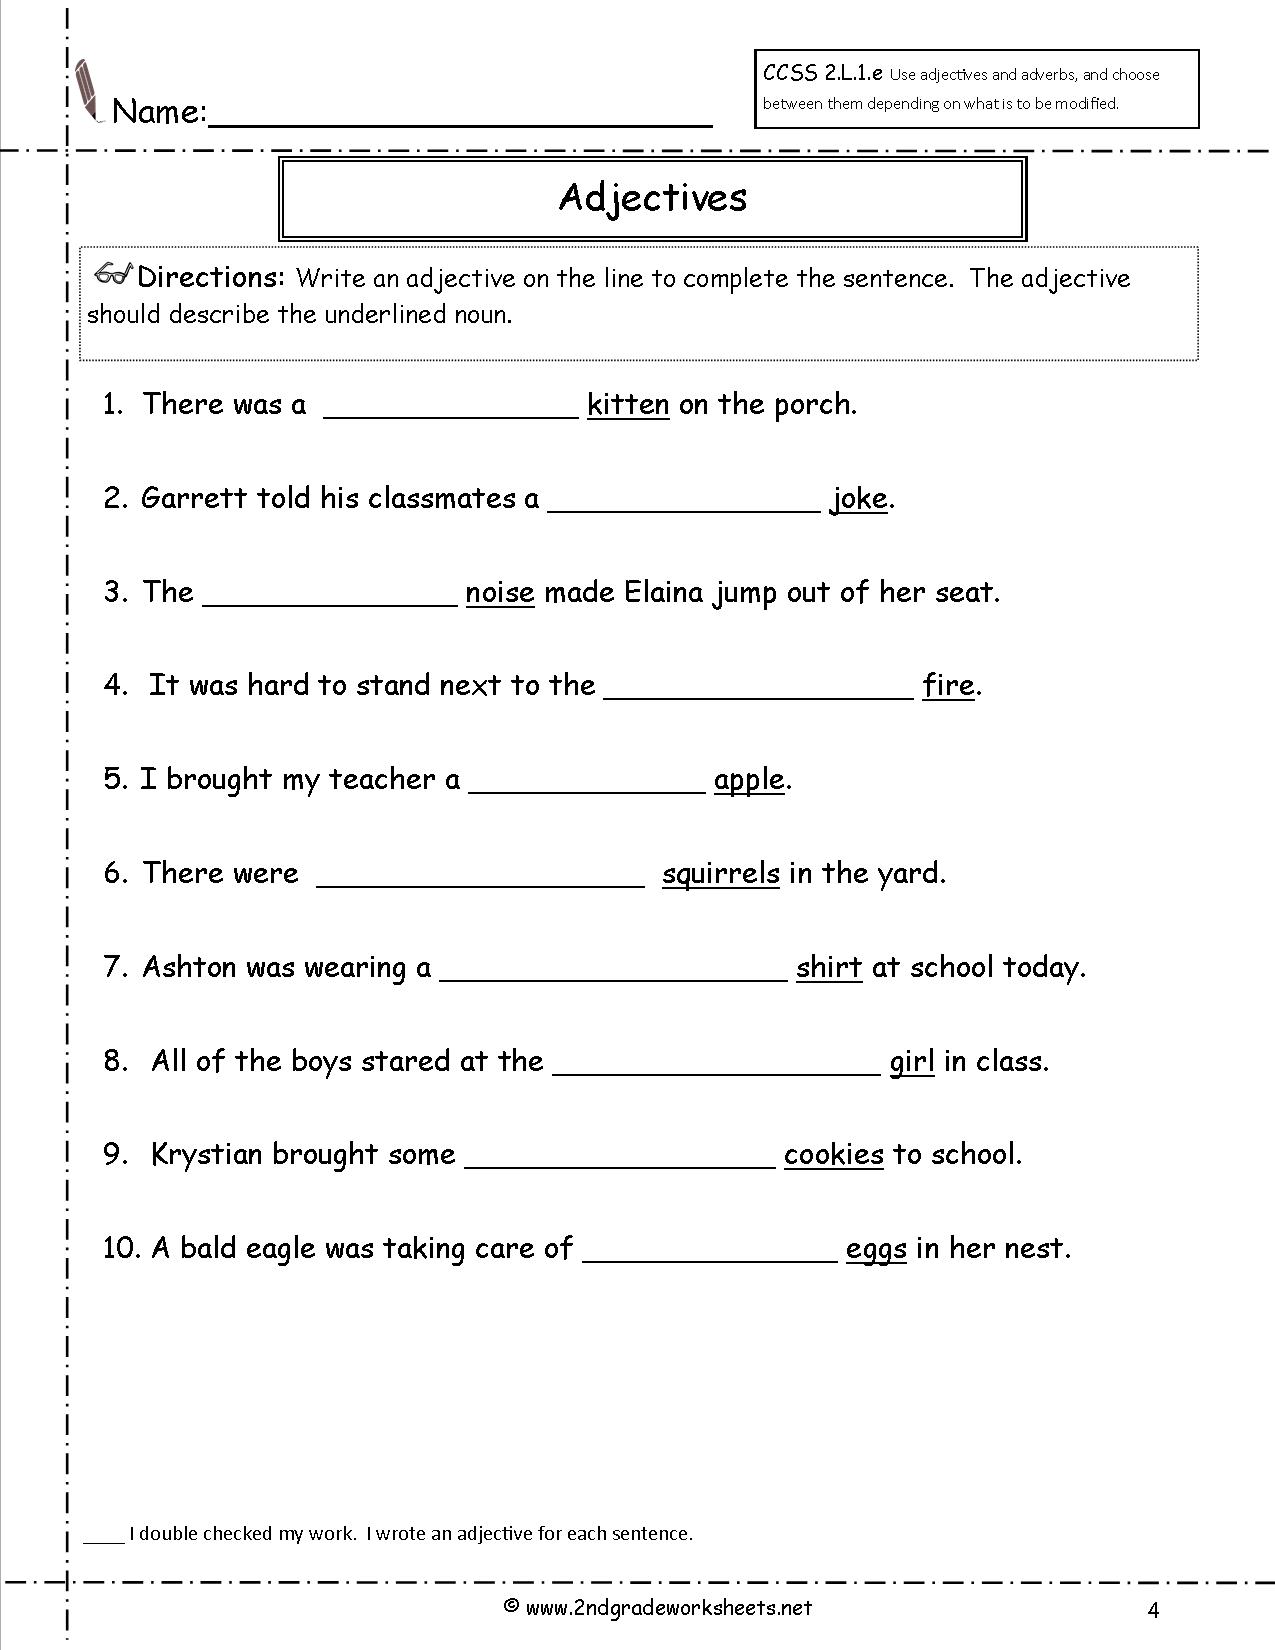 comparative-adjectives-worksheets-for-grade-5-comparative-adjectives